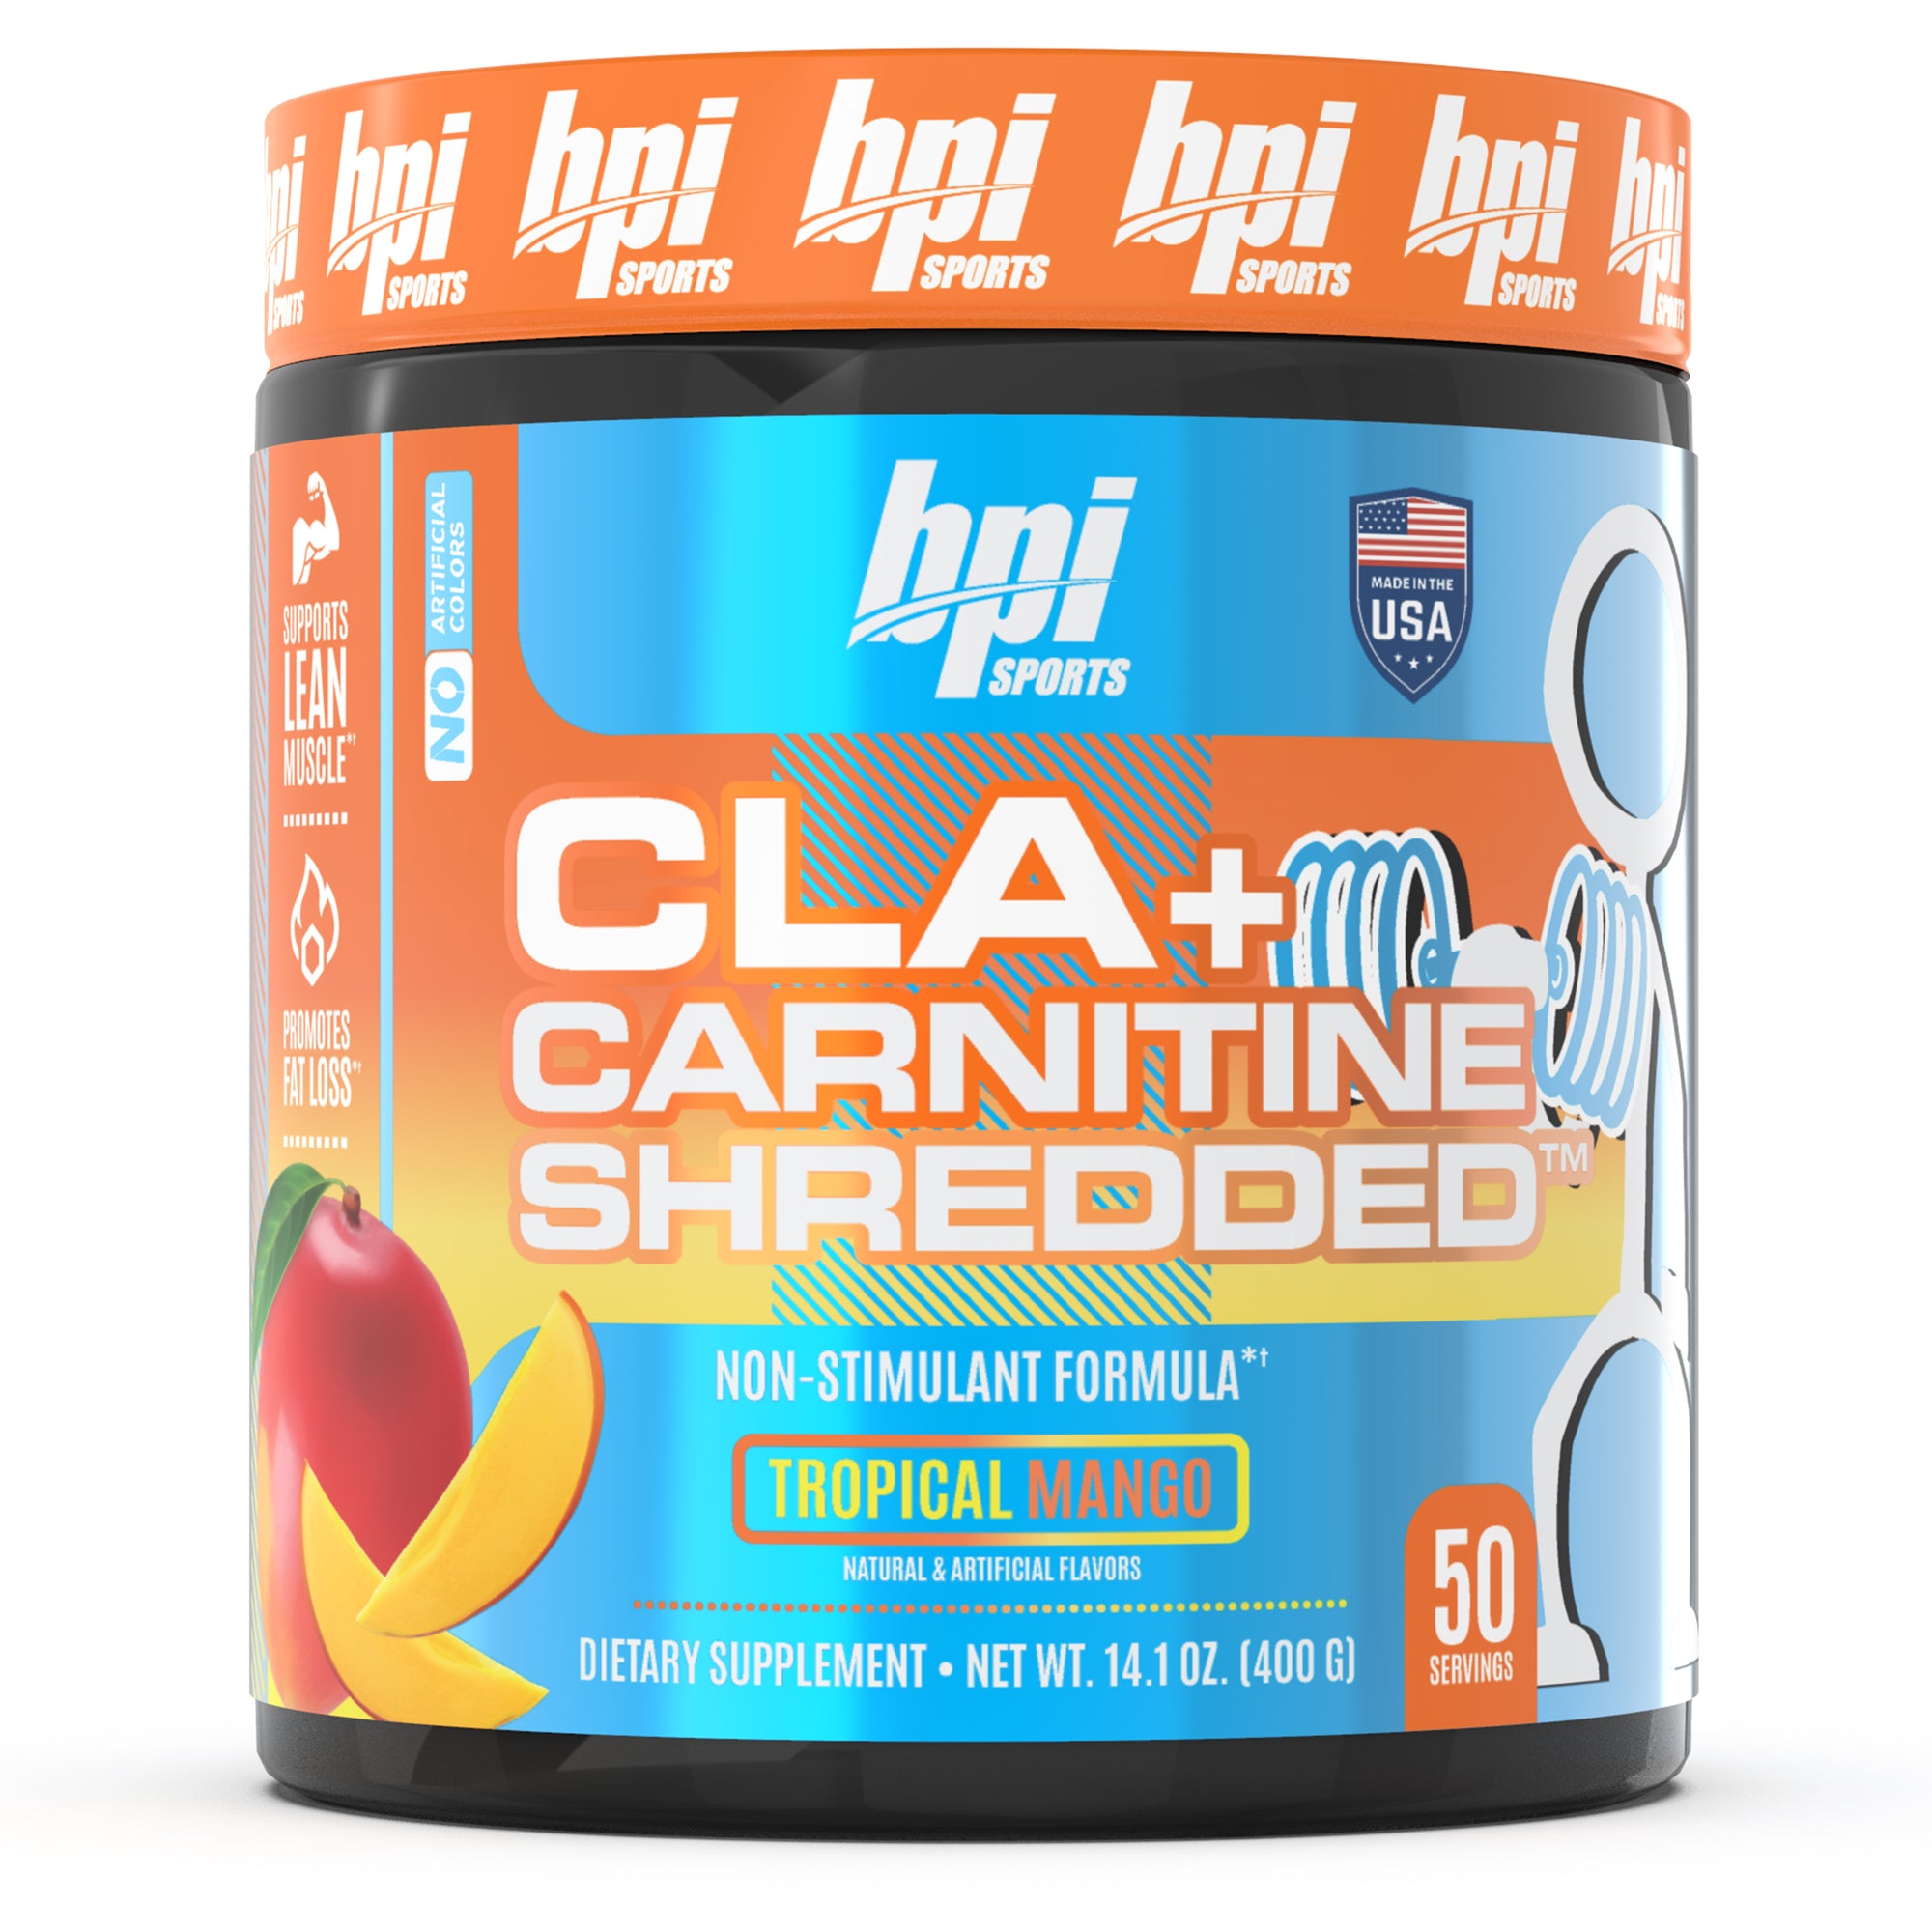 CLA + Carnitine Shredded™ - Weight Loss and Natural Energy (50 Servings)